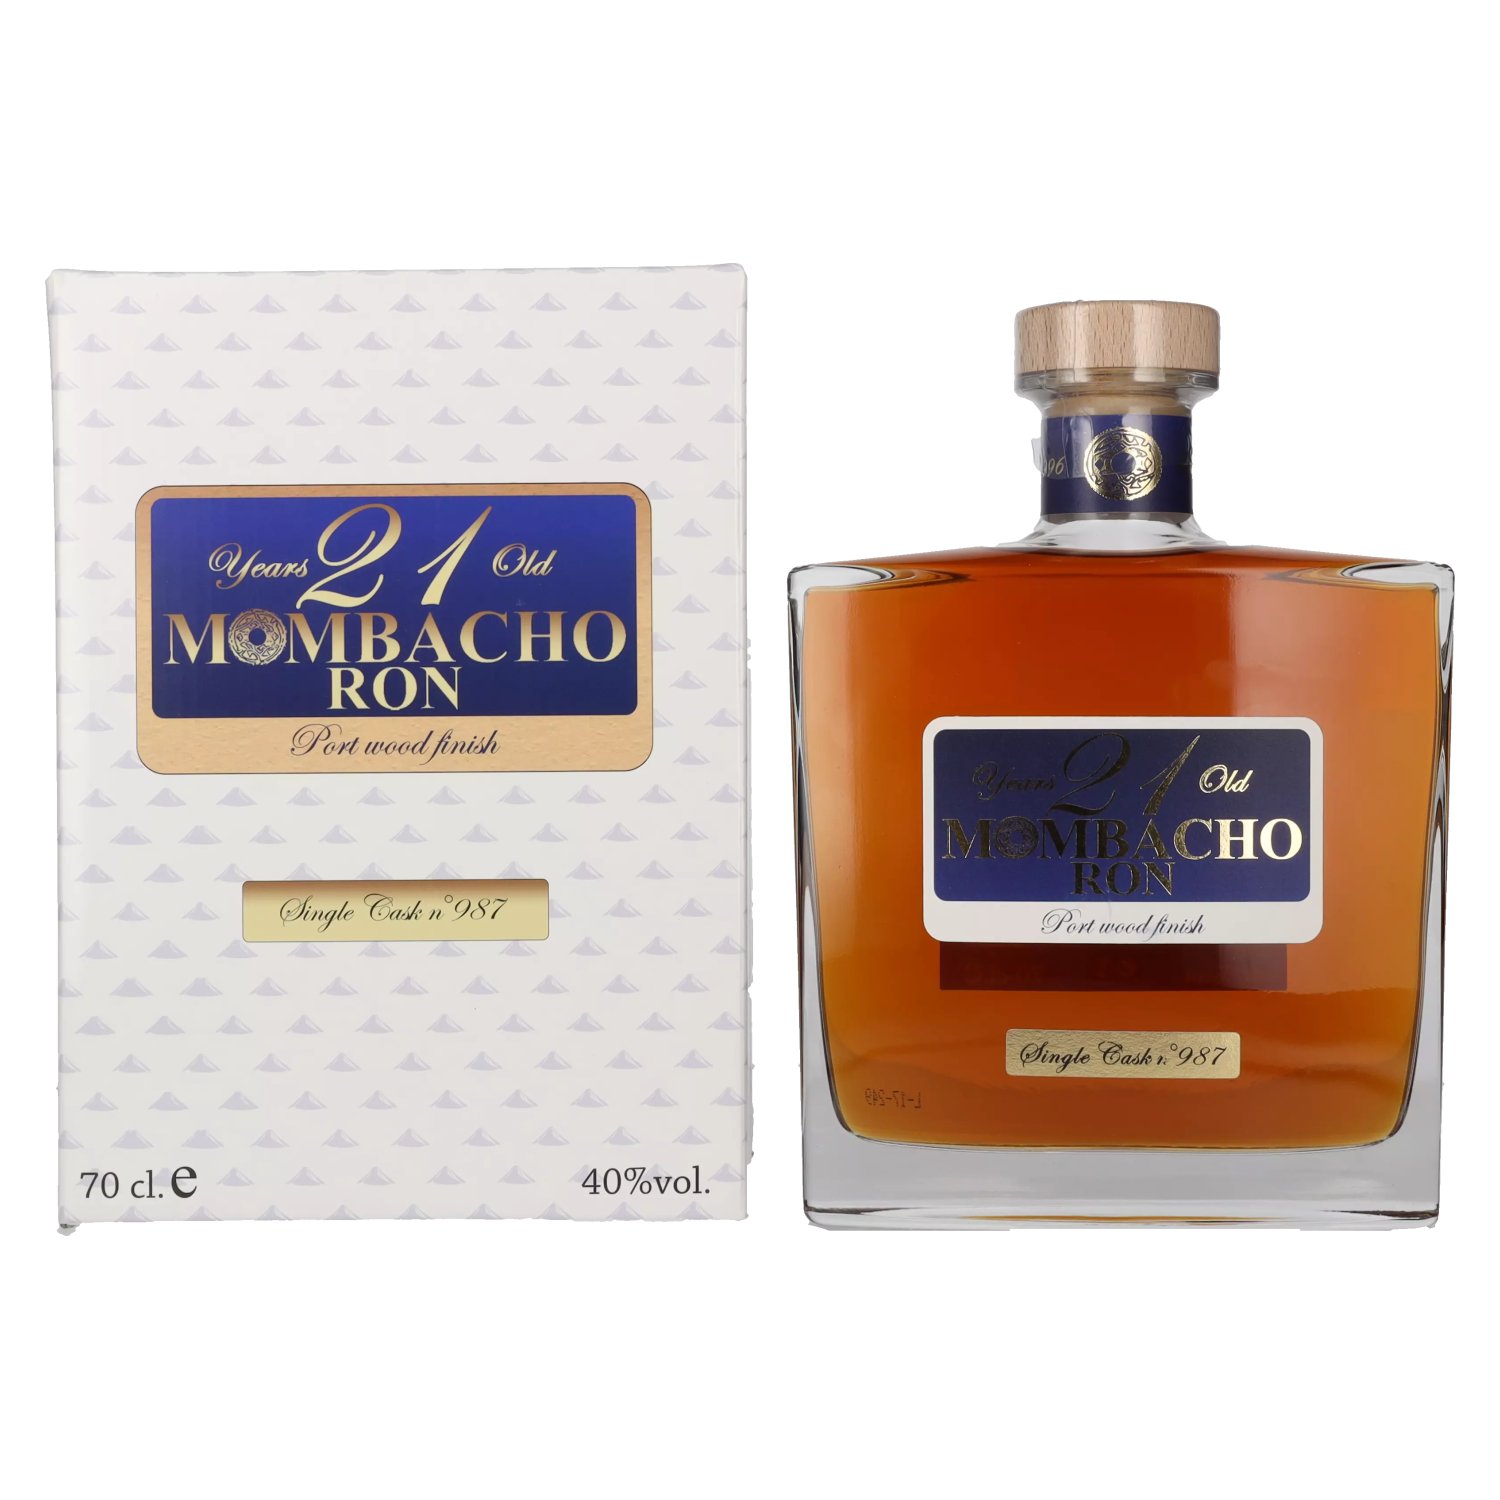 Ron 40% Wood Vol. Old in Years Port 0,7l Mombacho 21 Giftbox Finish